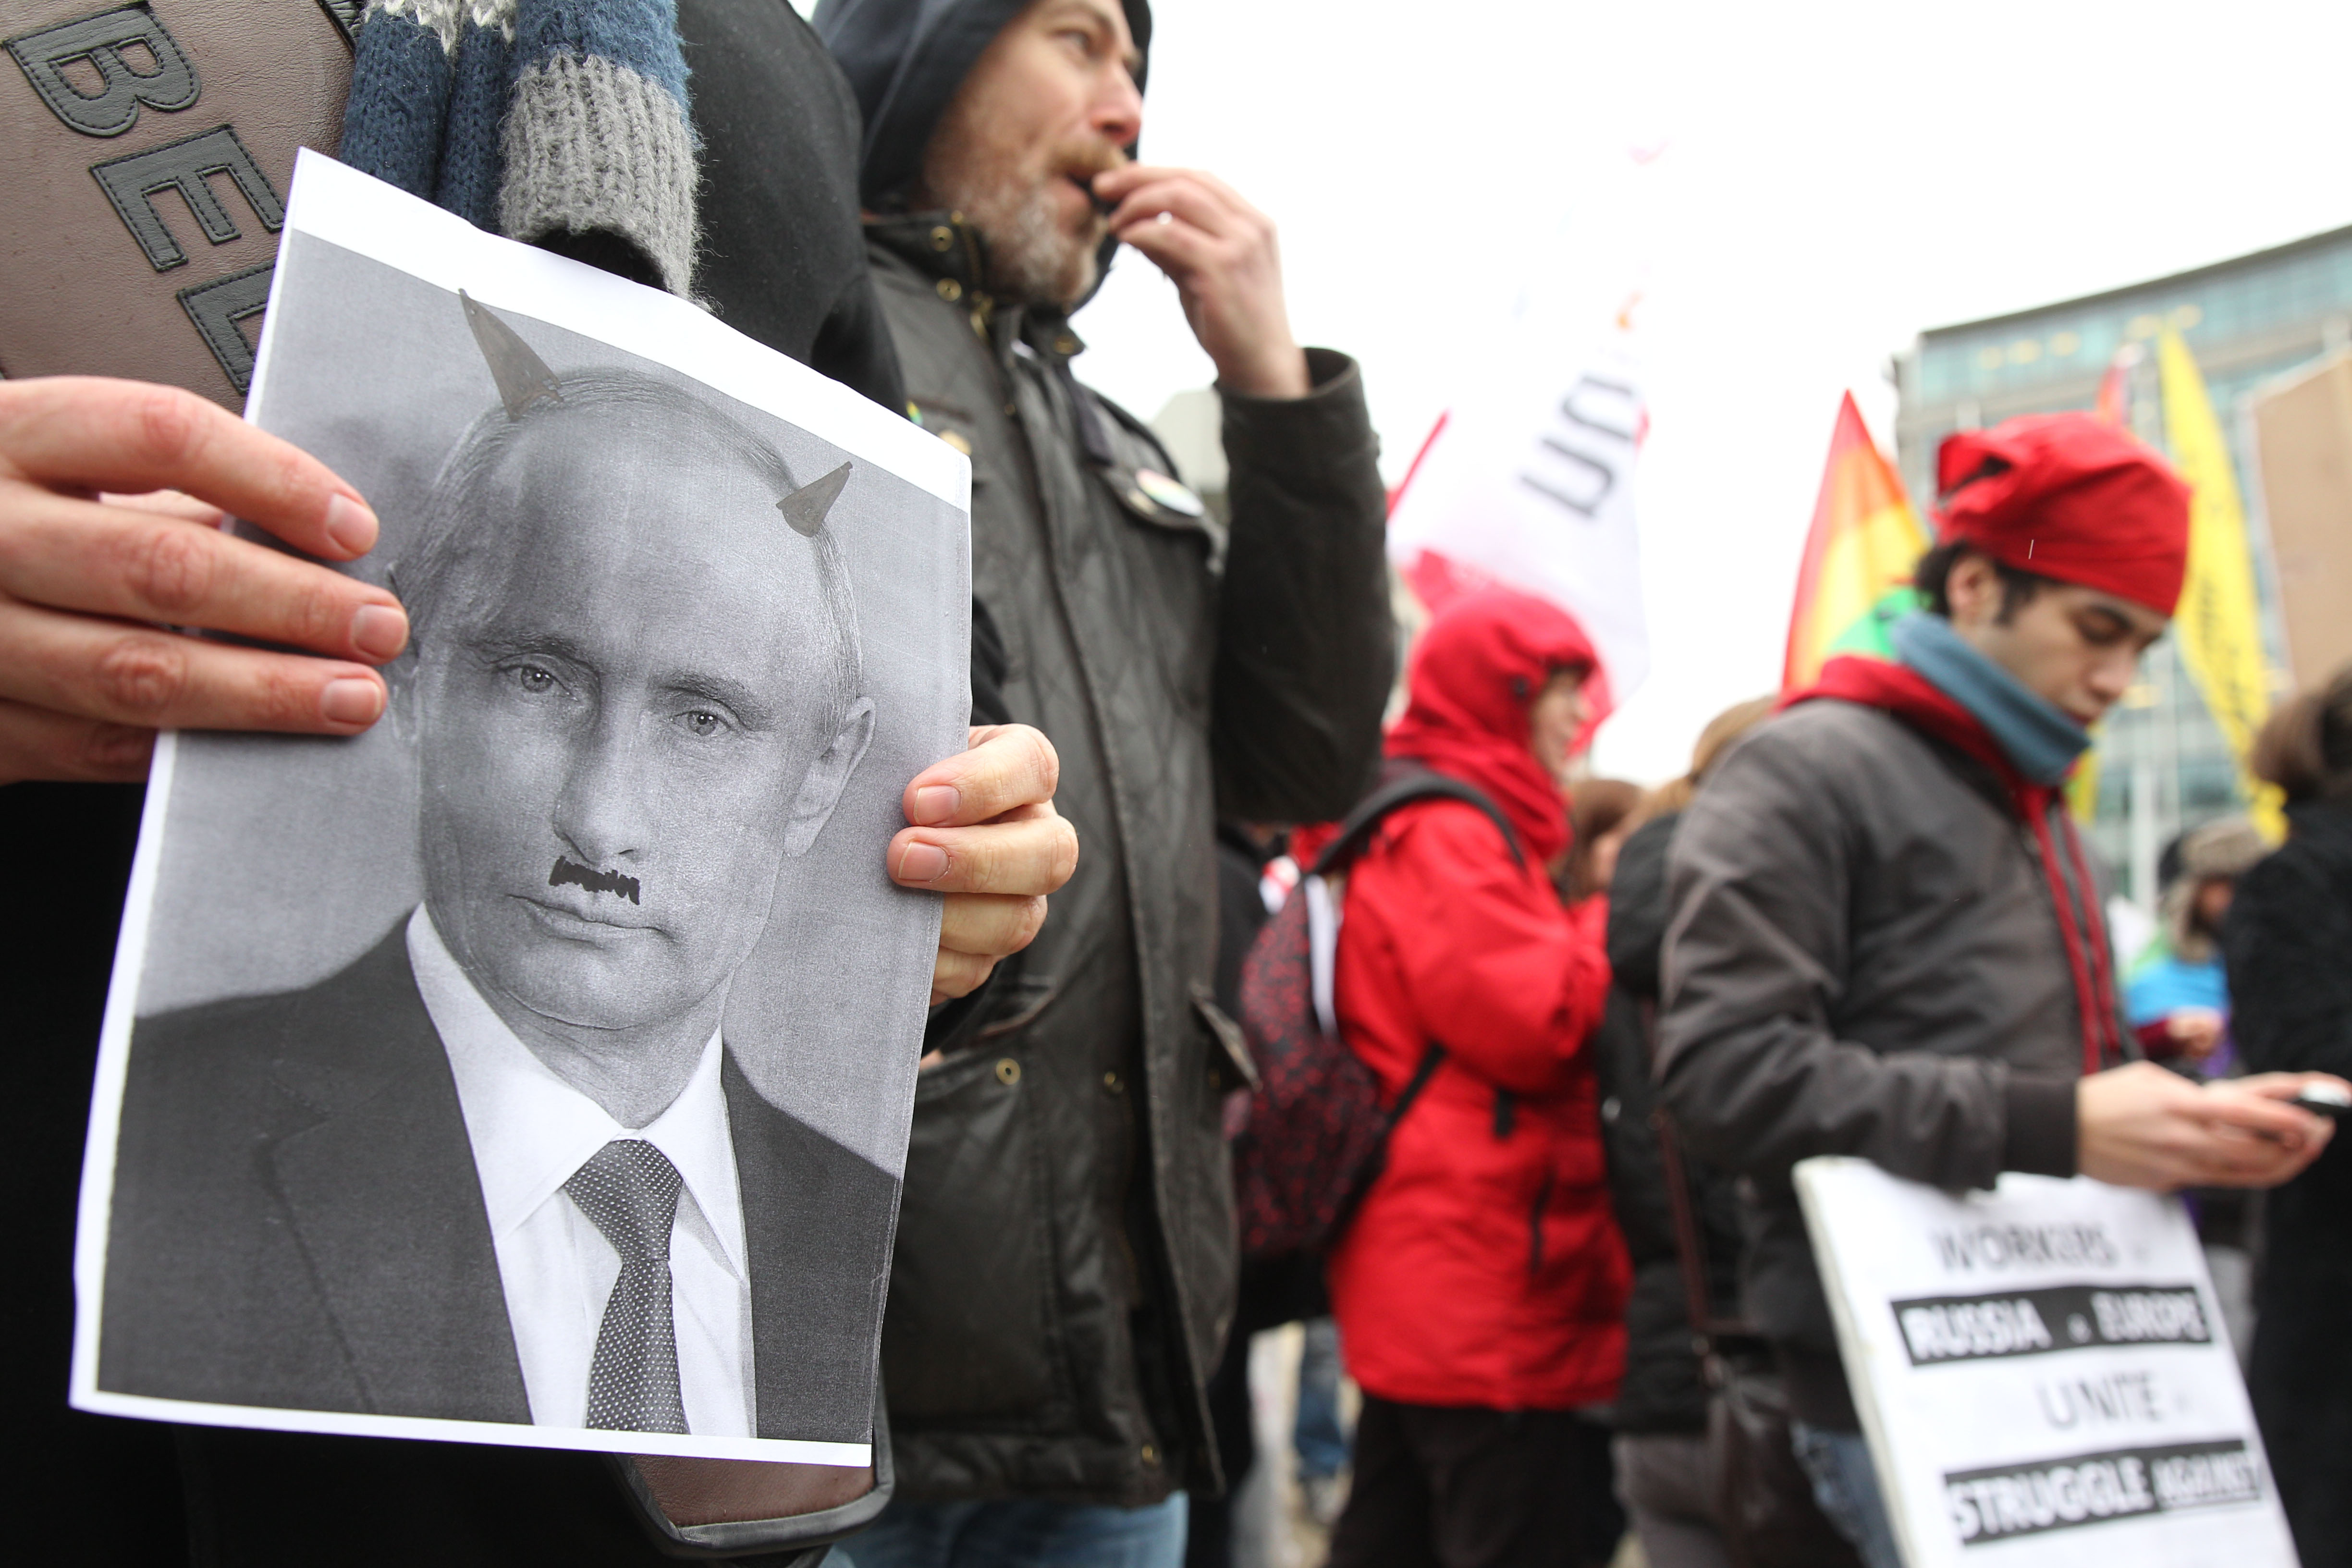 27 January 2014, Belgium. An activist shows a photo of Russia's President Vladimir Putin depicted with devil horns, as protesters gather outside the European Commission in Brussels.